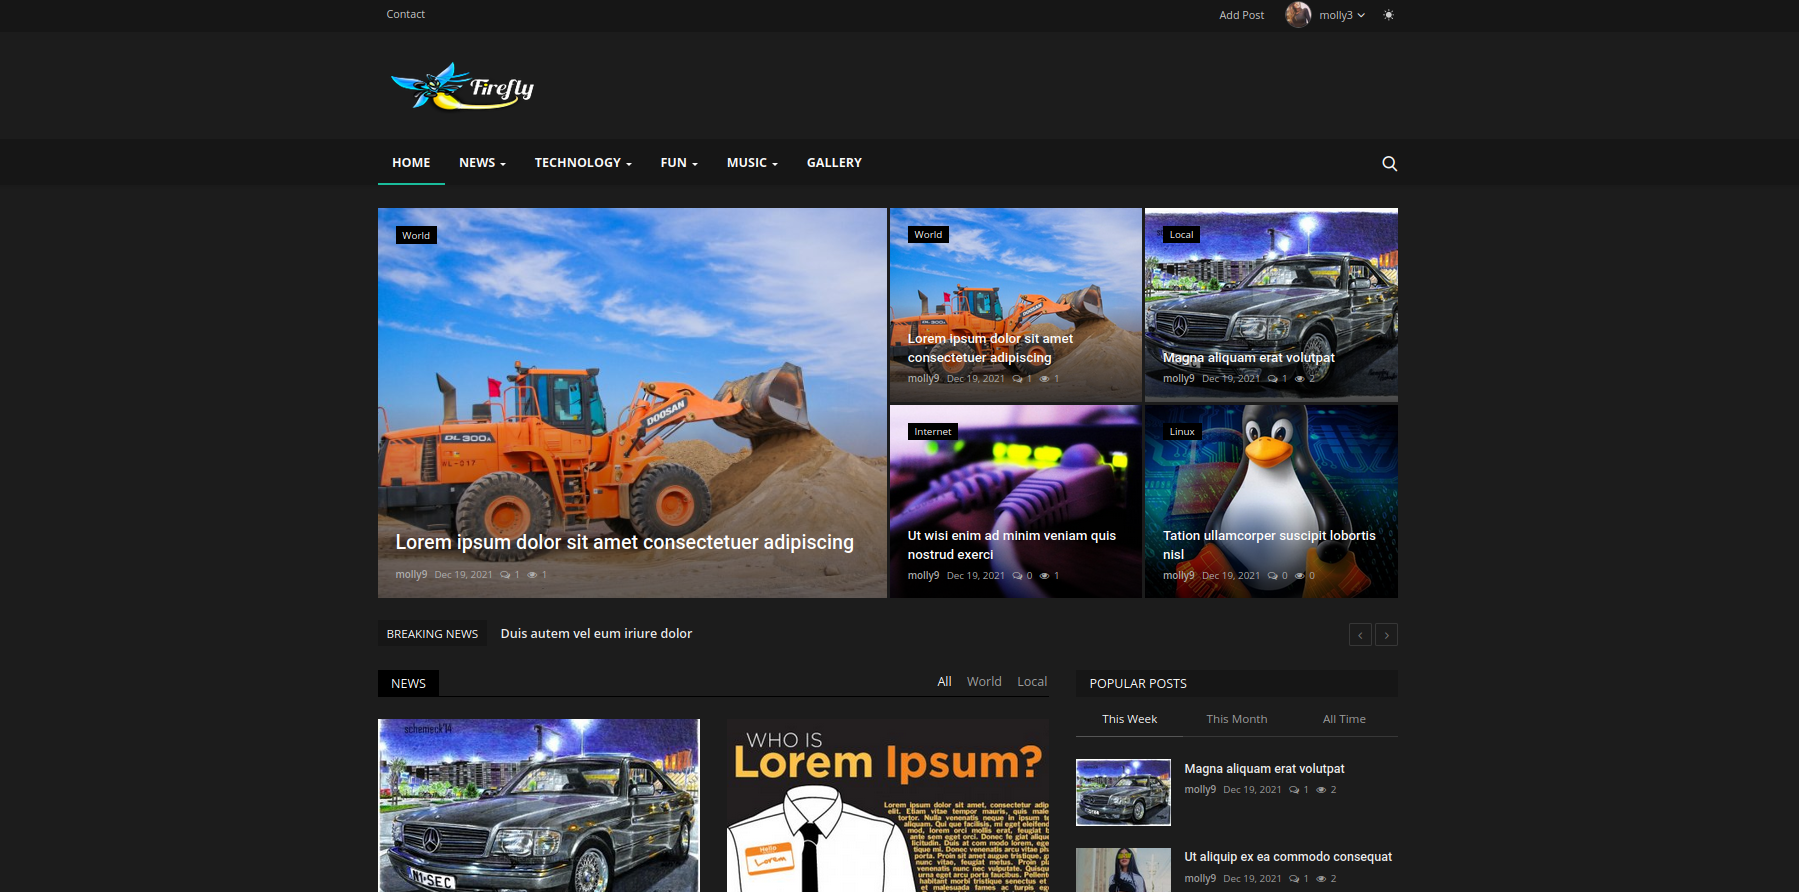 Firefly - News & Magazine Portal PHP script 1.1 - Developers license version for unlimited use